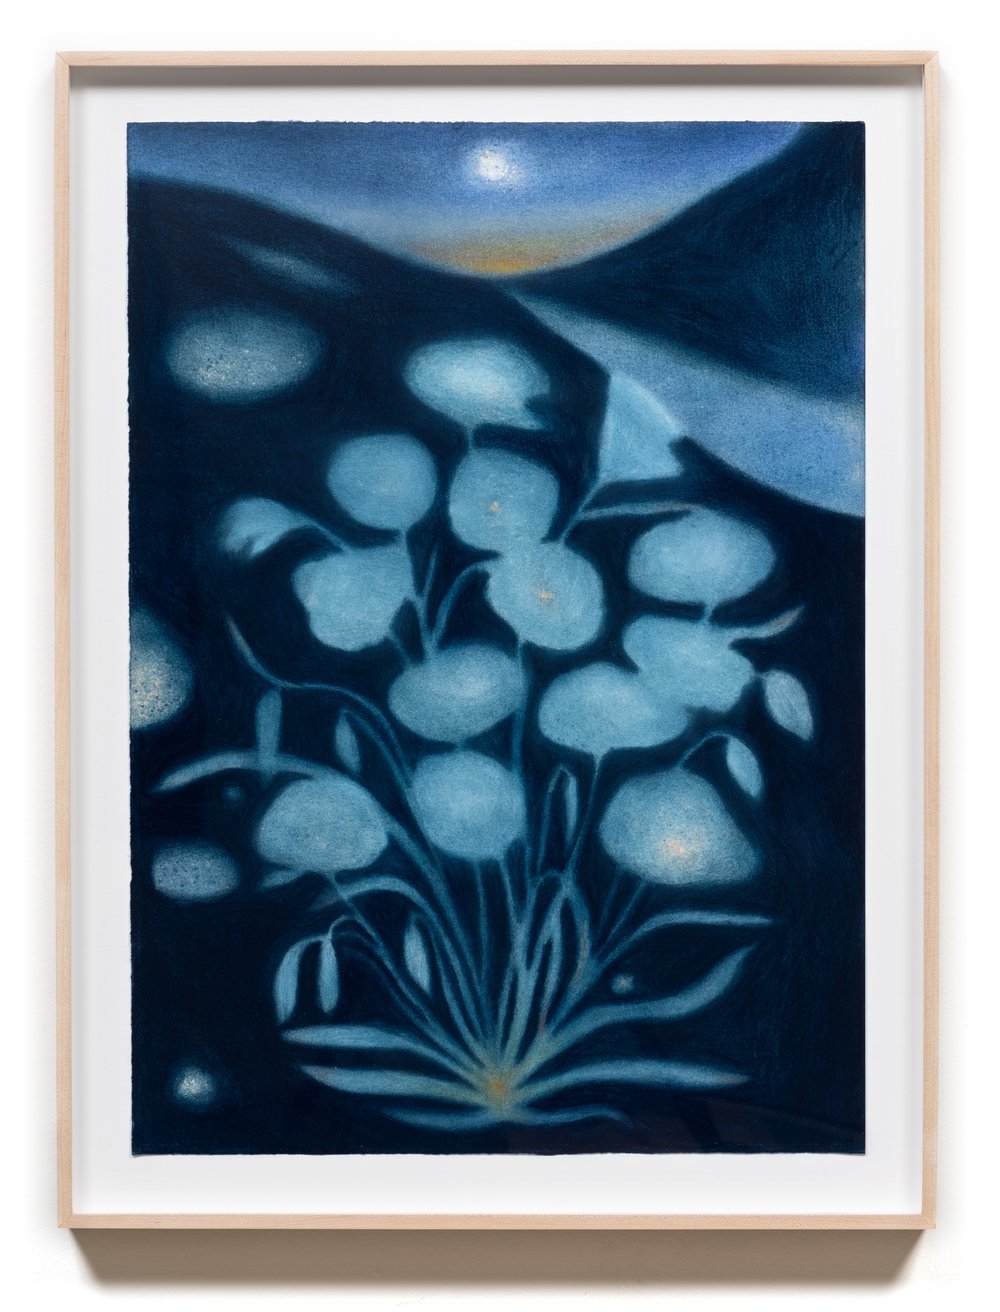   White Poppies , 2021 Soft paste on paper 23 1/2 x 17 1/2 x 1 1/2 inches (framed) 